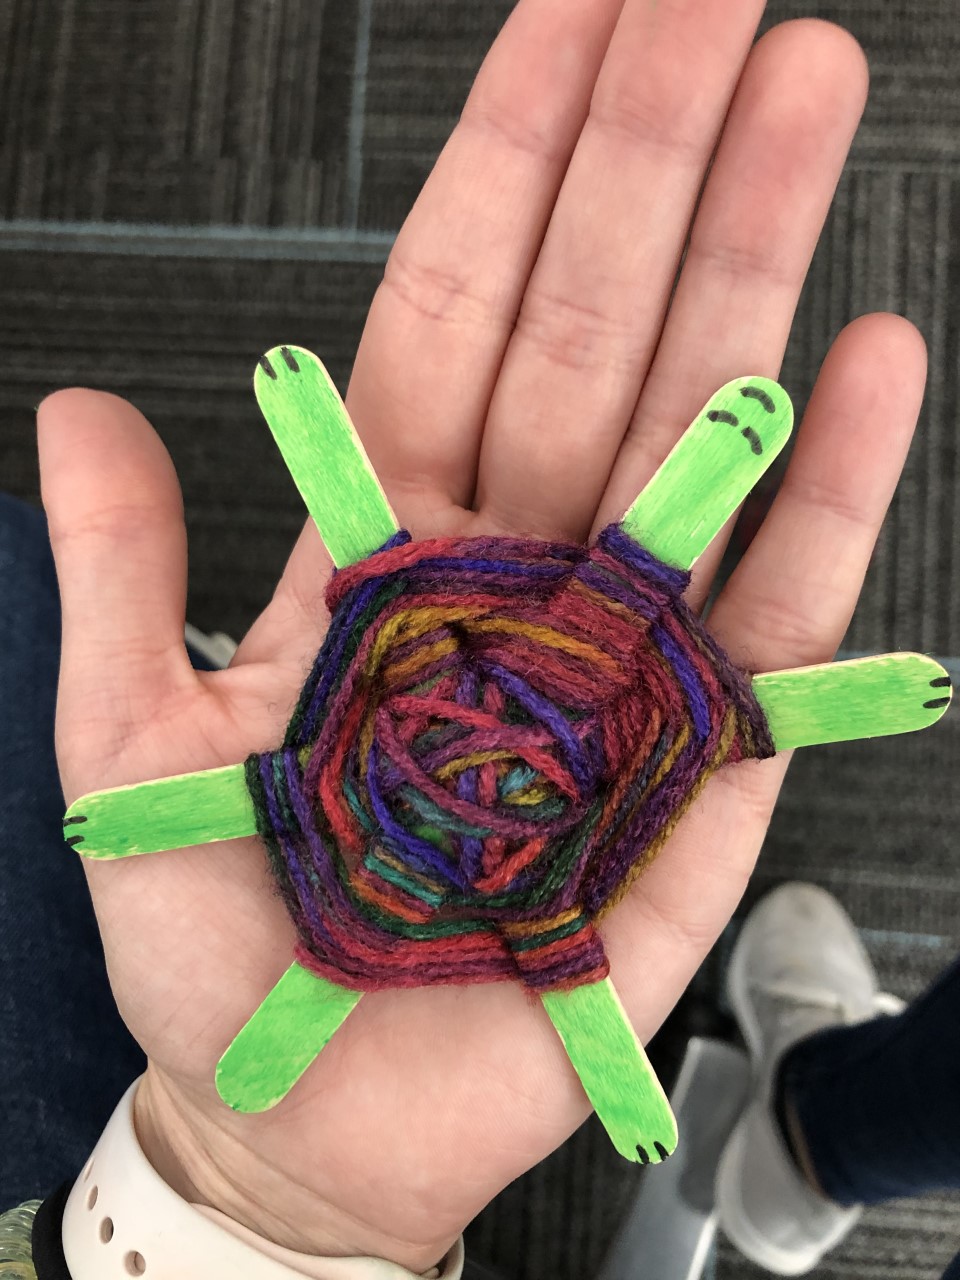 Picture of a hand holding a turtle made of craft sticks with a woven yarn shell